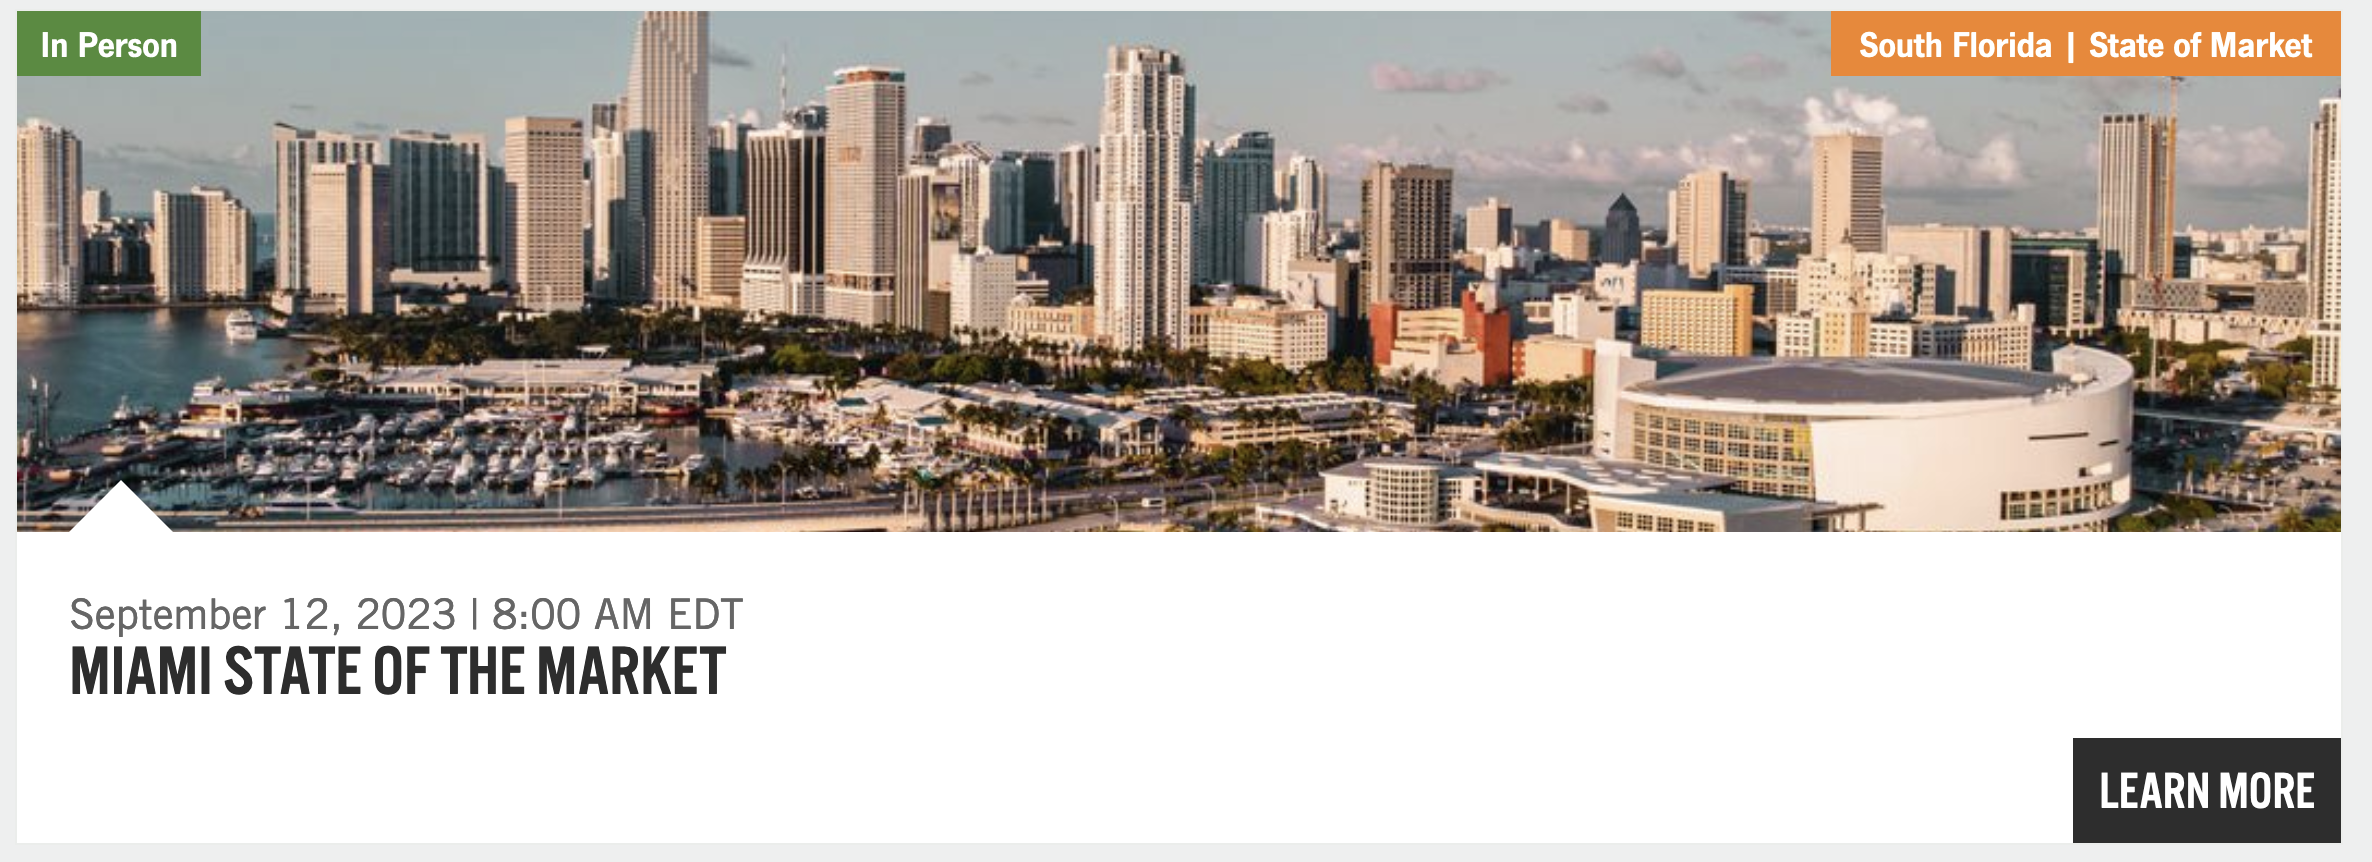 BISNOW Event: Miami State of The Market